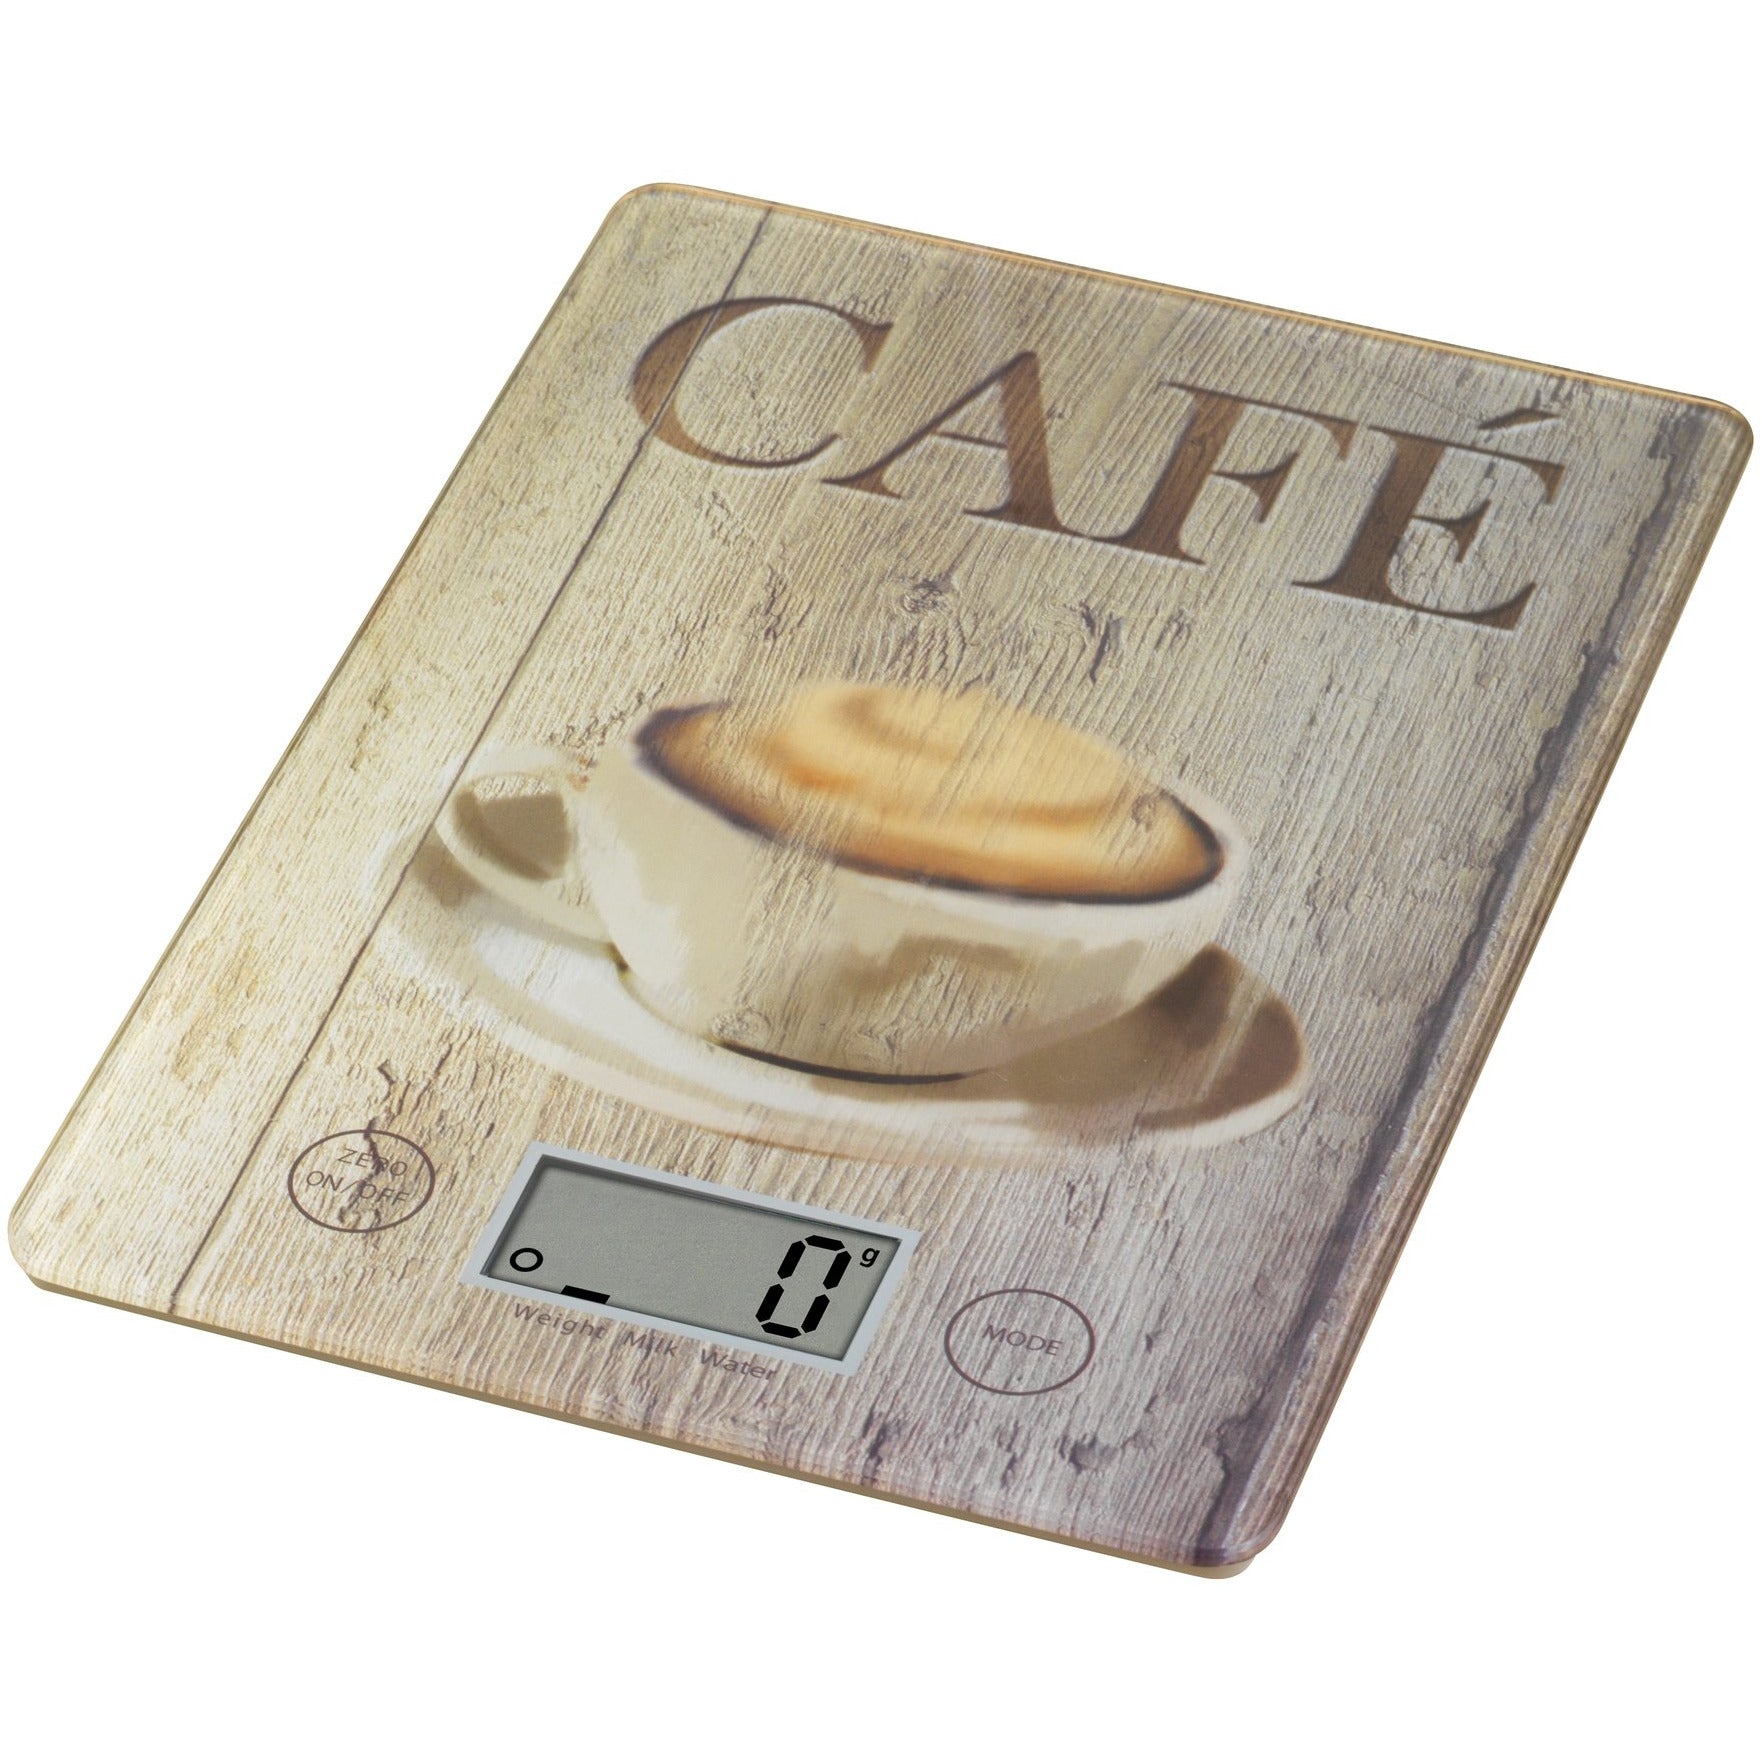 Kitchen Scale Caf